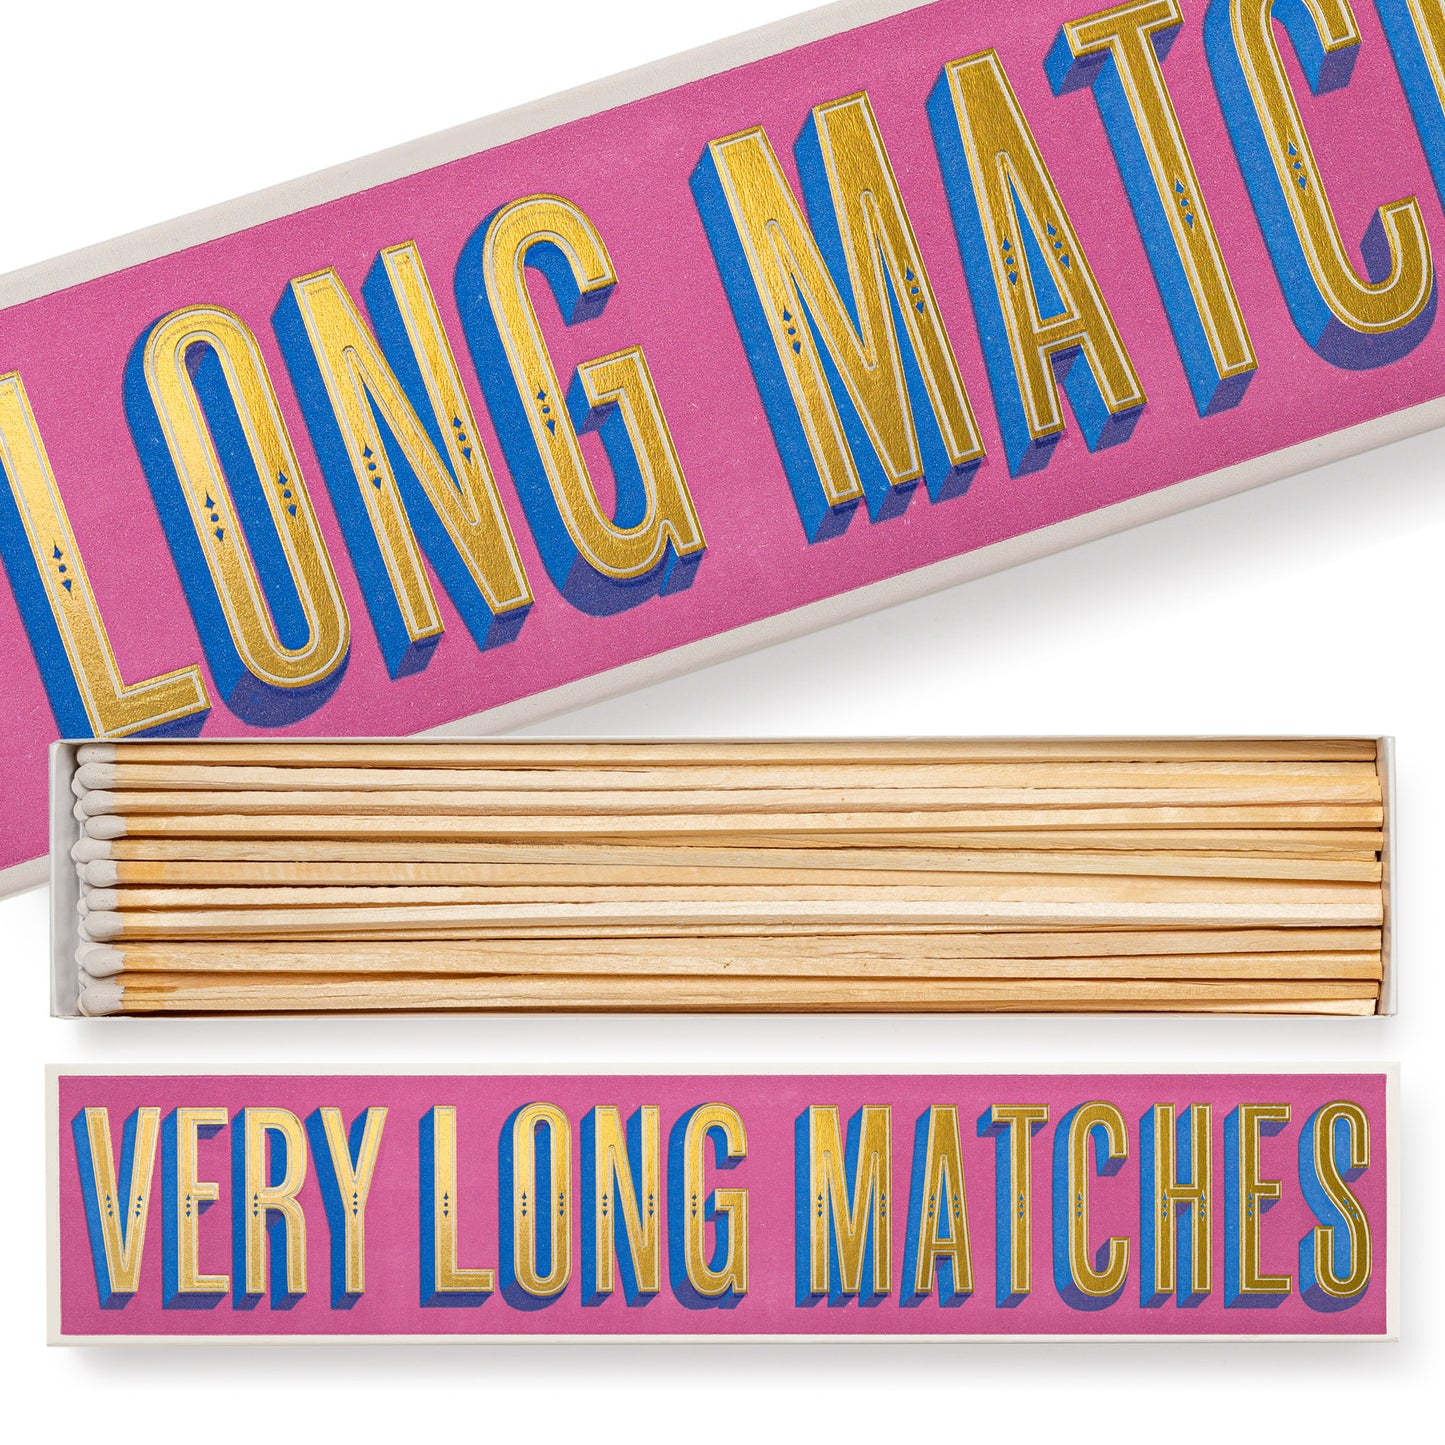 Very Long Matches Boxed Matches